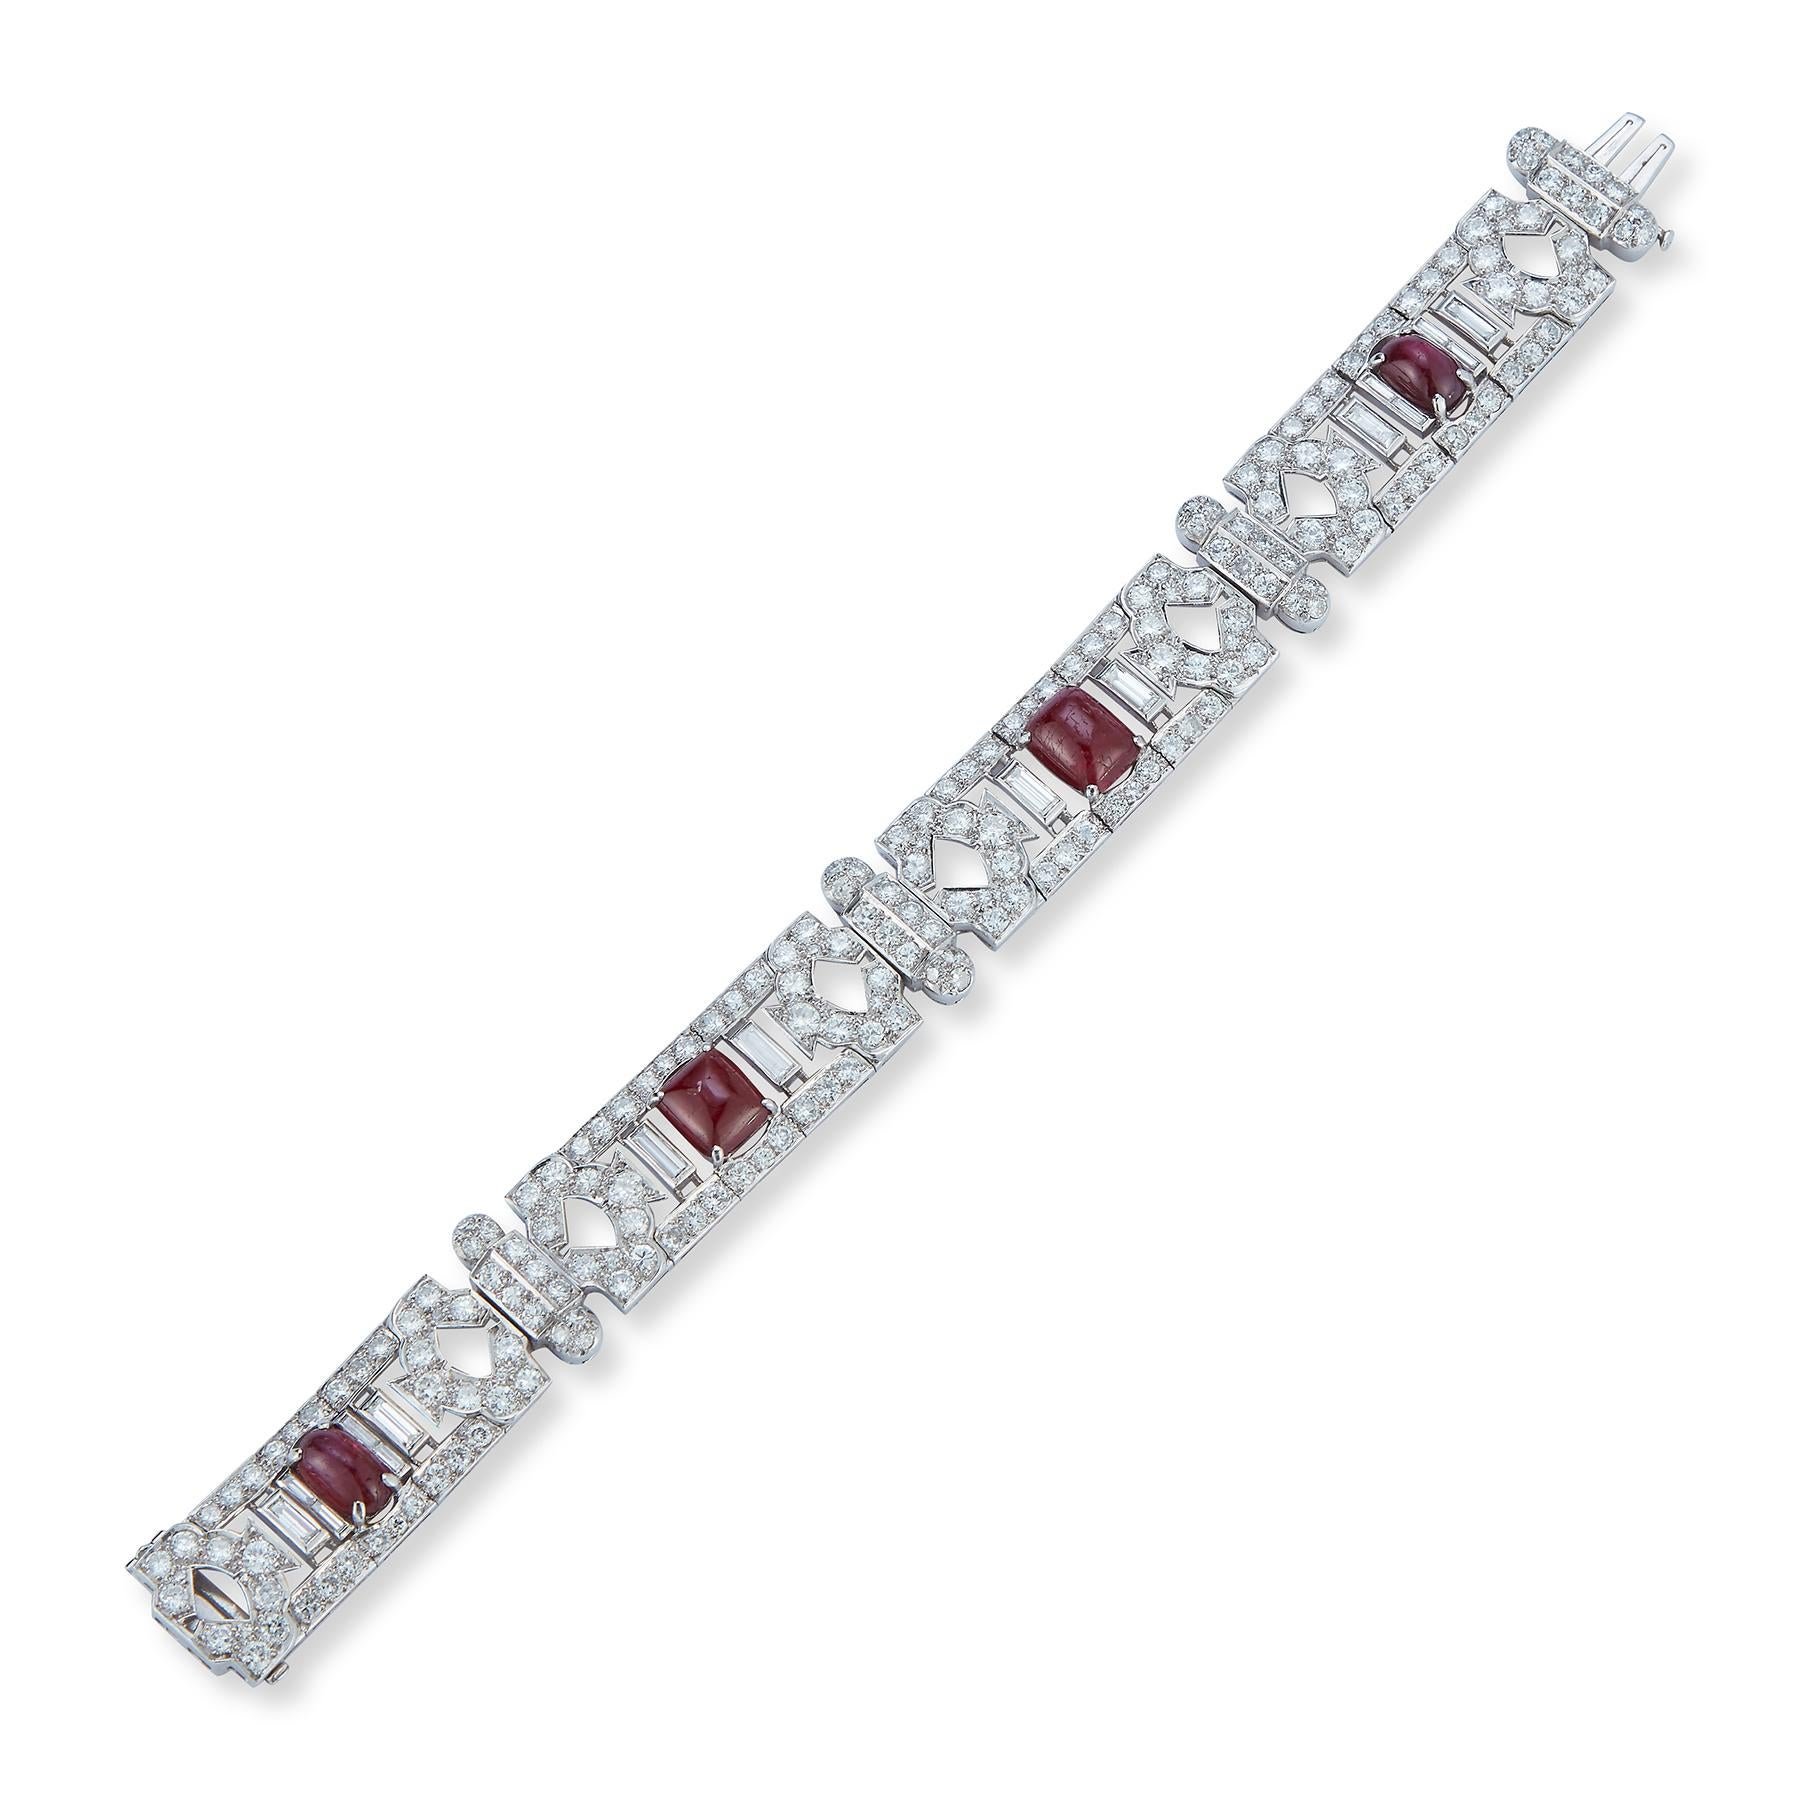 Certified Natural Cabochon Burmese Ruby and Diamond Art Deco bracelet
4 Cabochon Rubies set in a Platinum Bracelet with numerous Round and Baguette cut Diamonds
Made circa 1920
Measurements: 7